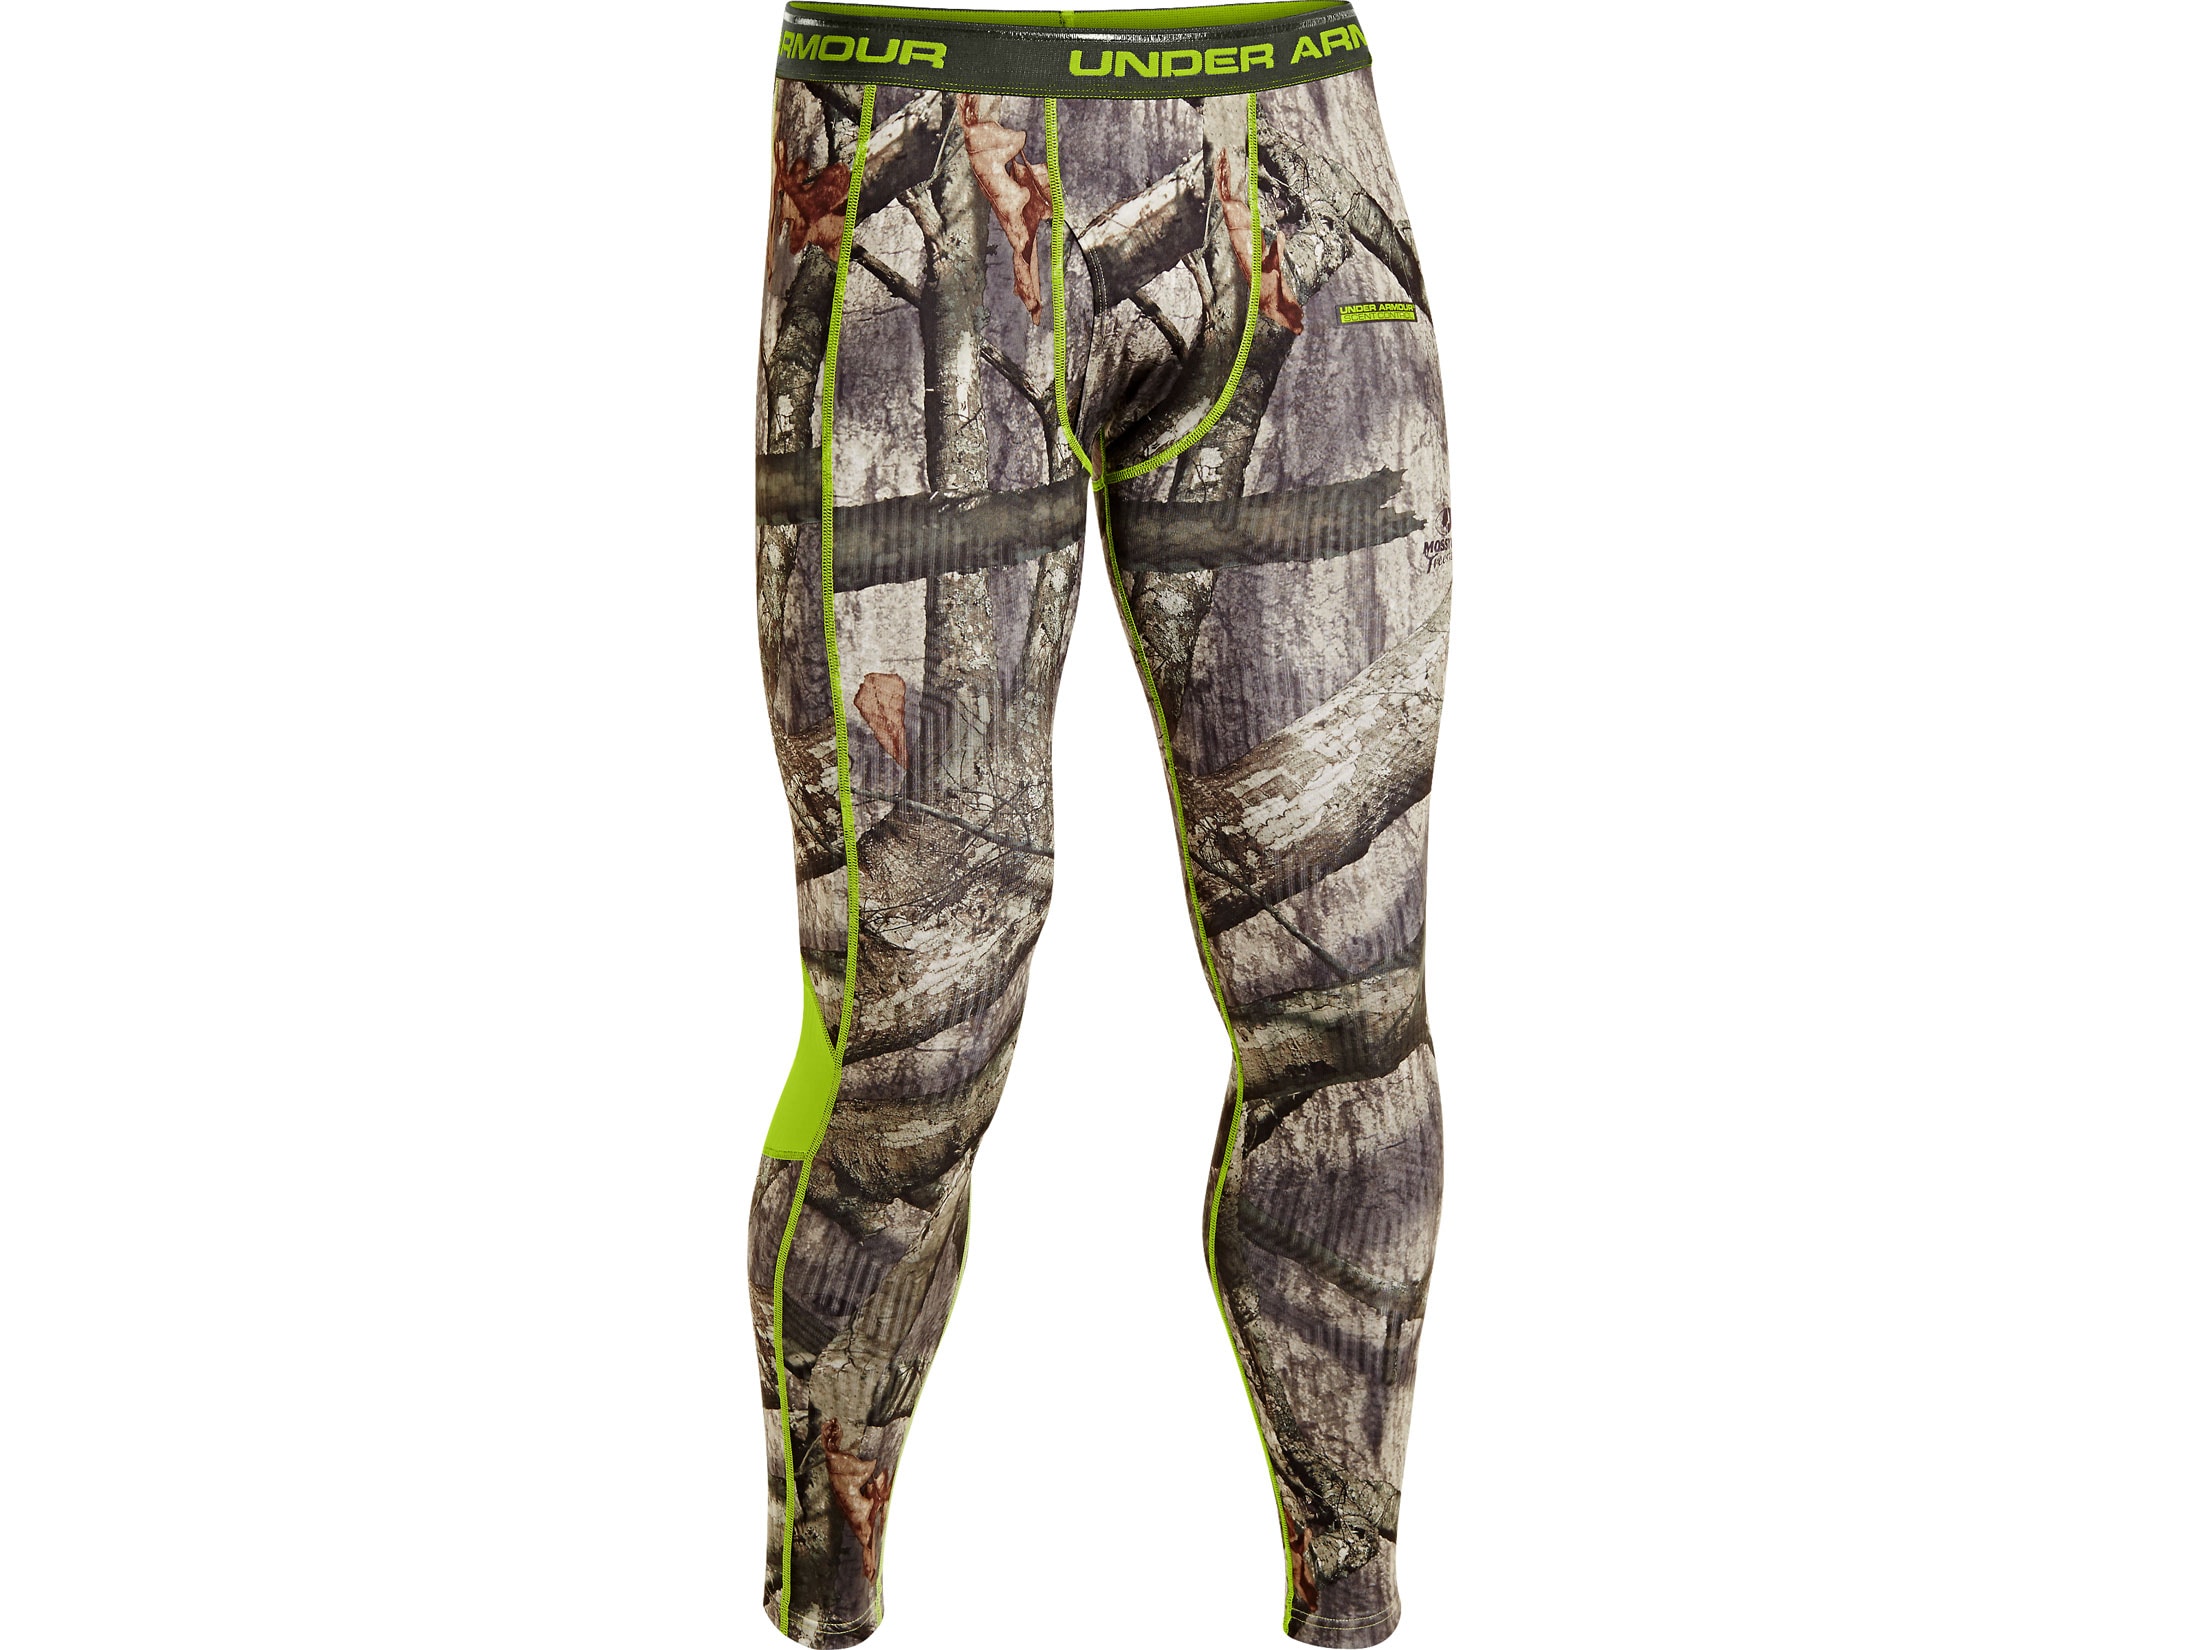 Under Armour Women's Cold Gear Infrared Scent Control EVO Leggings -  Realtree Xtra 'Camouflage' (XL)